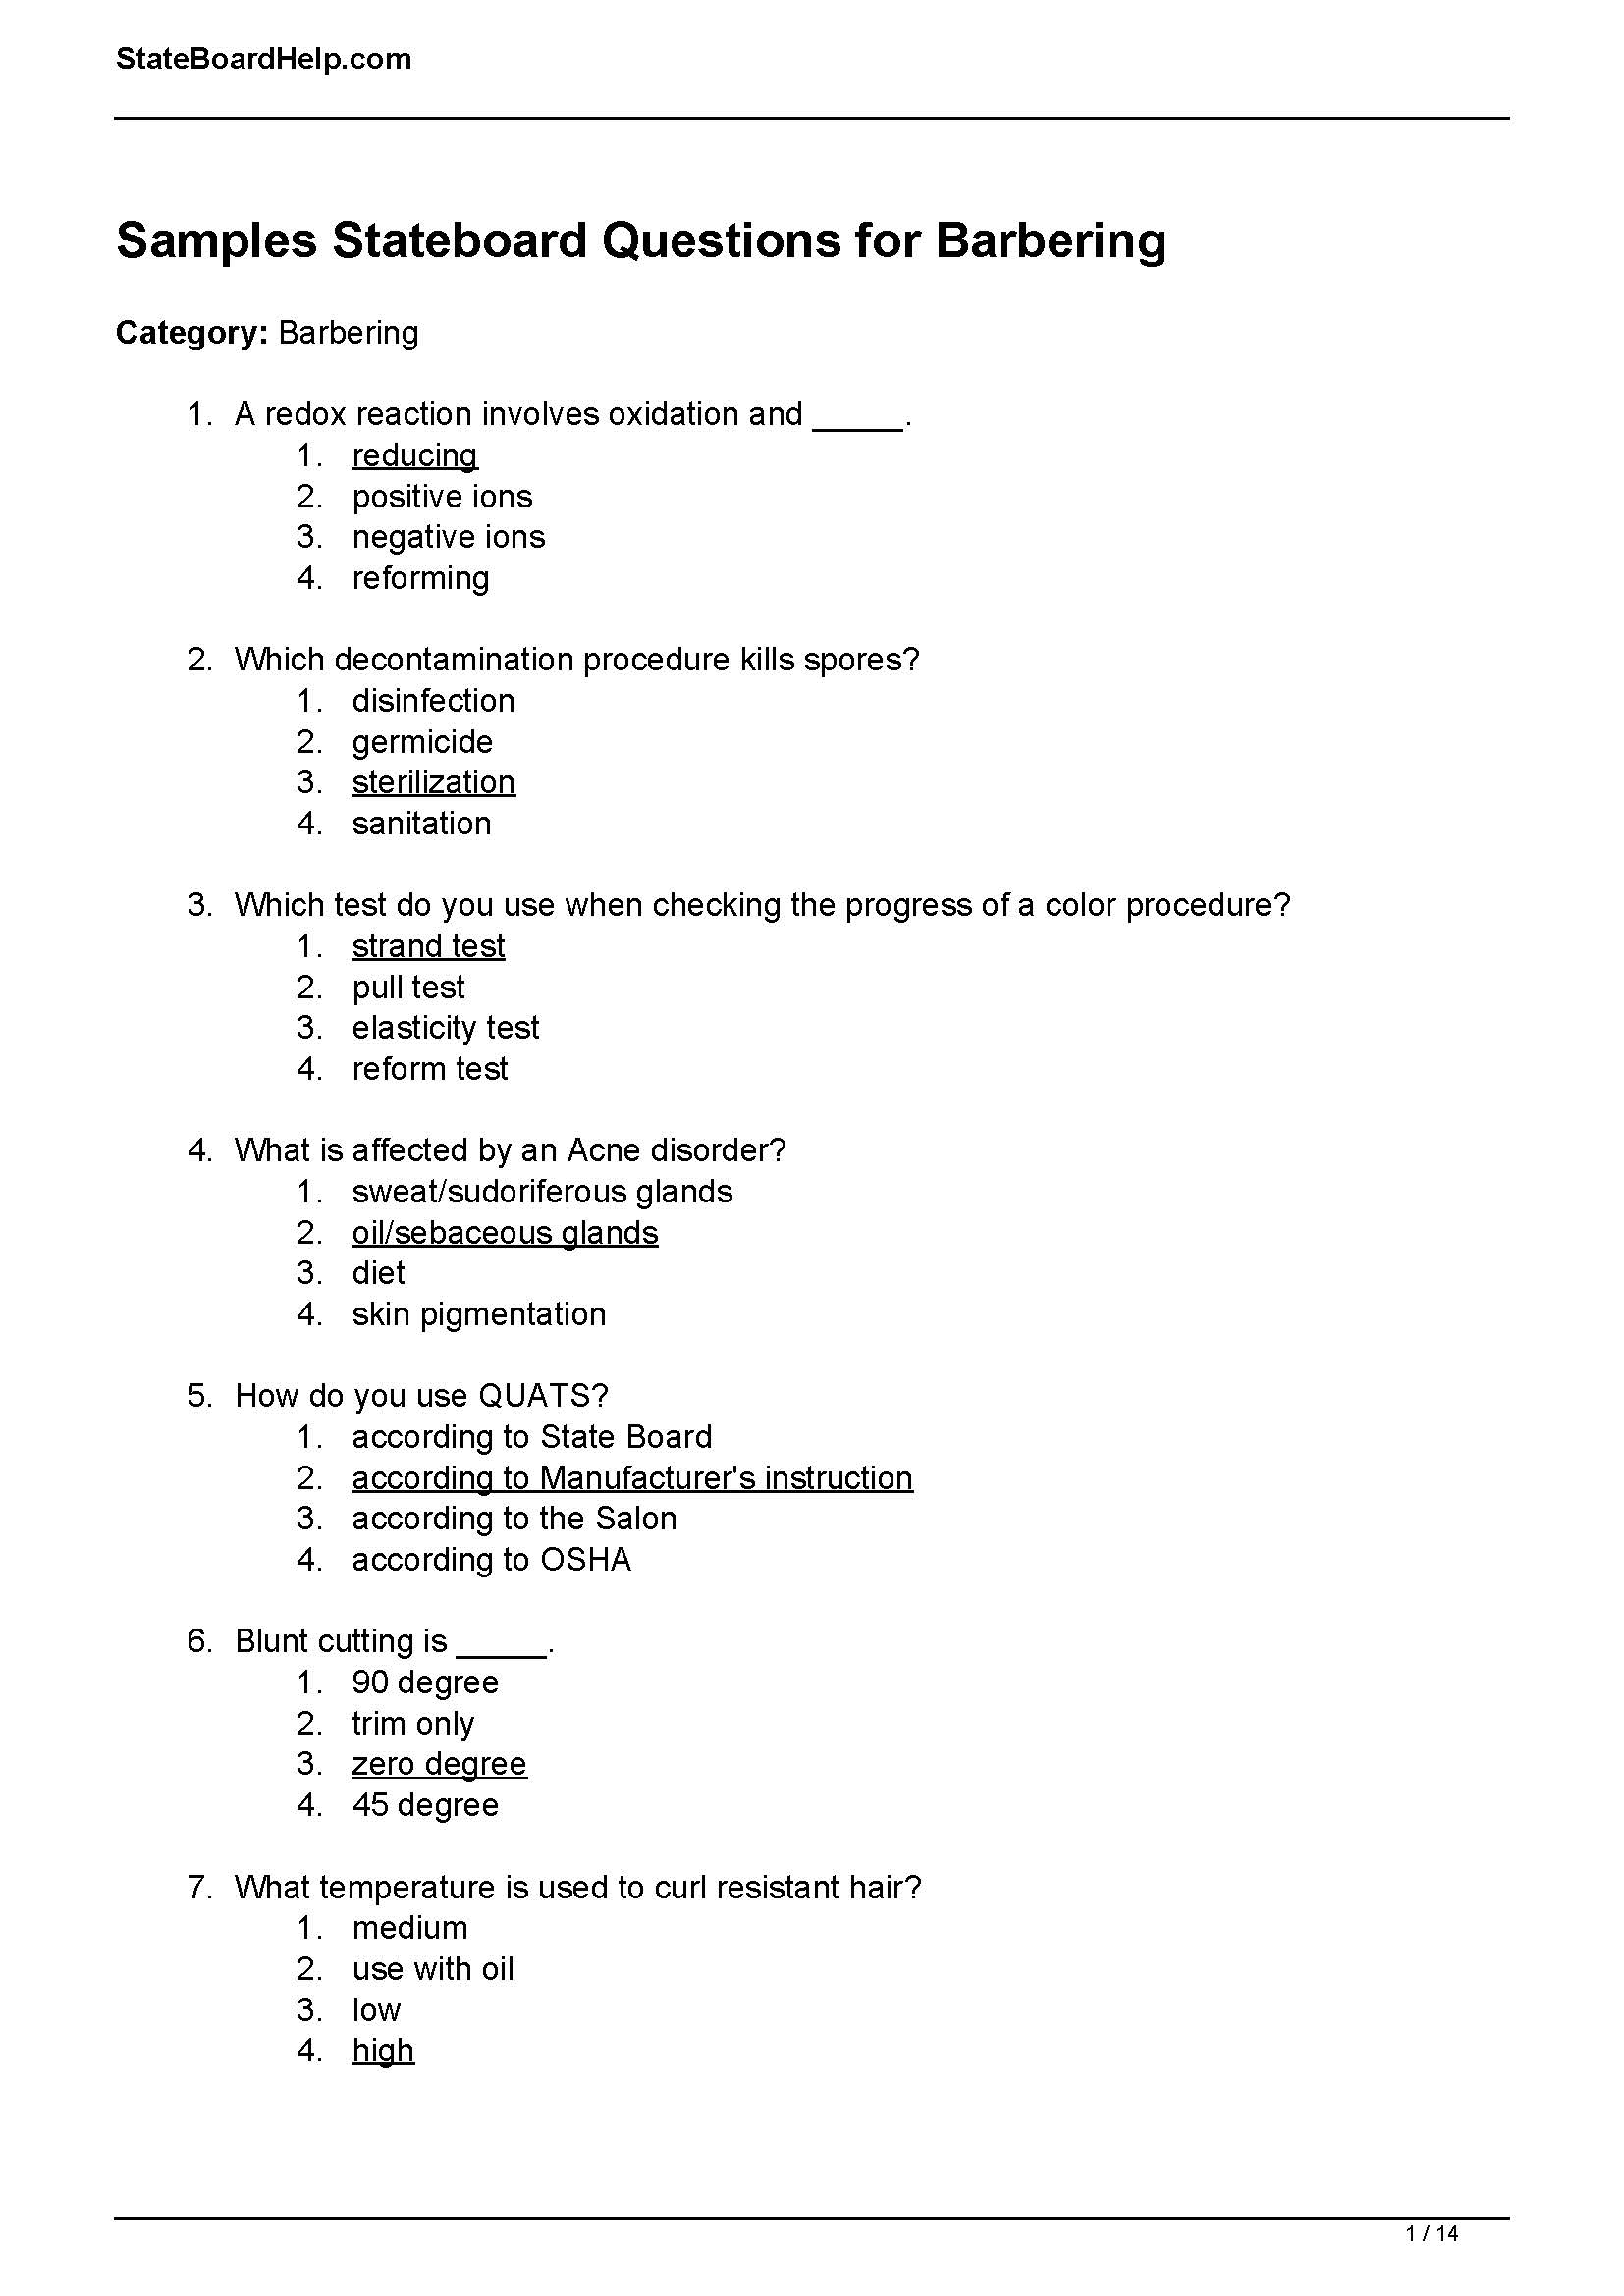 Barbering State Board Exam answers